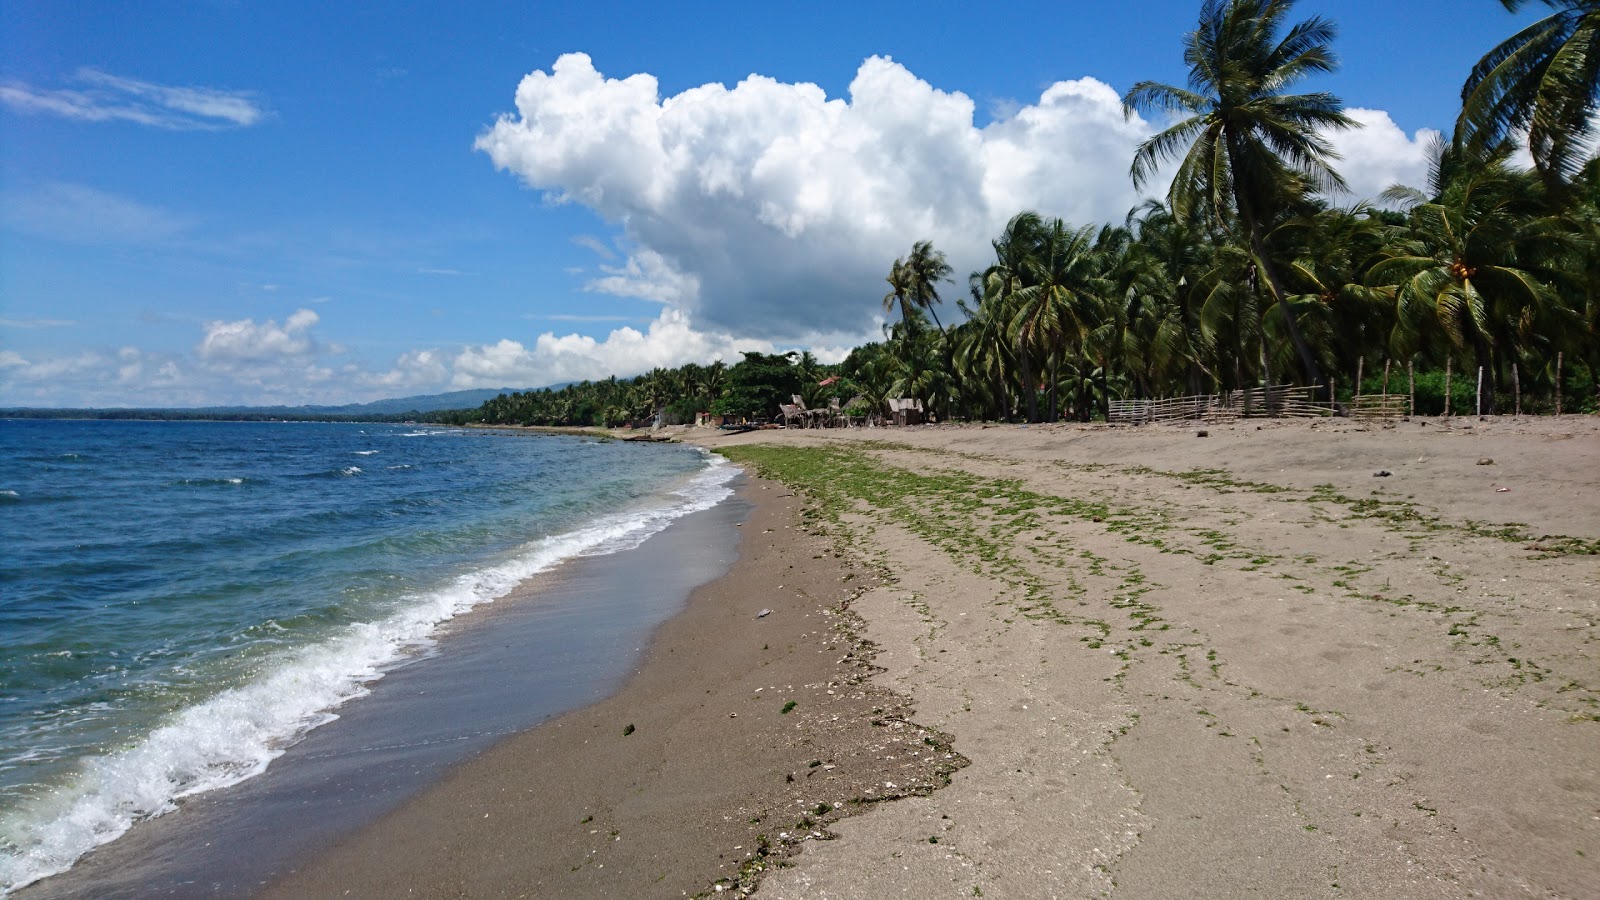 Photo of Panaon Beach with gray sand surface